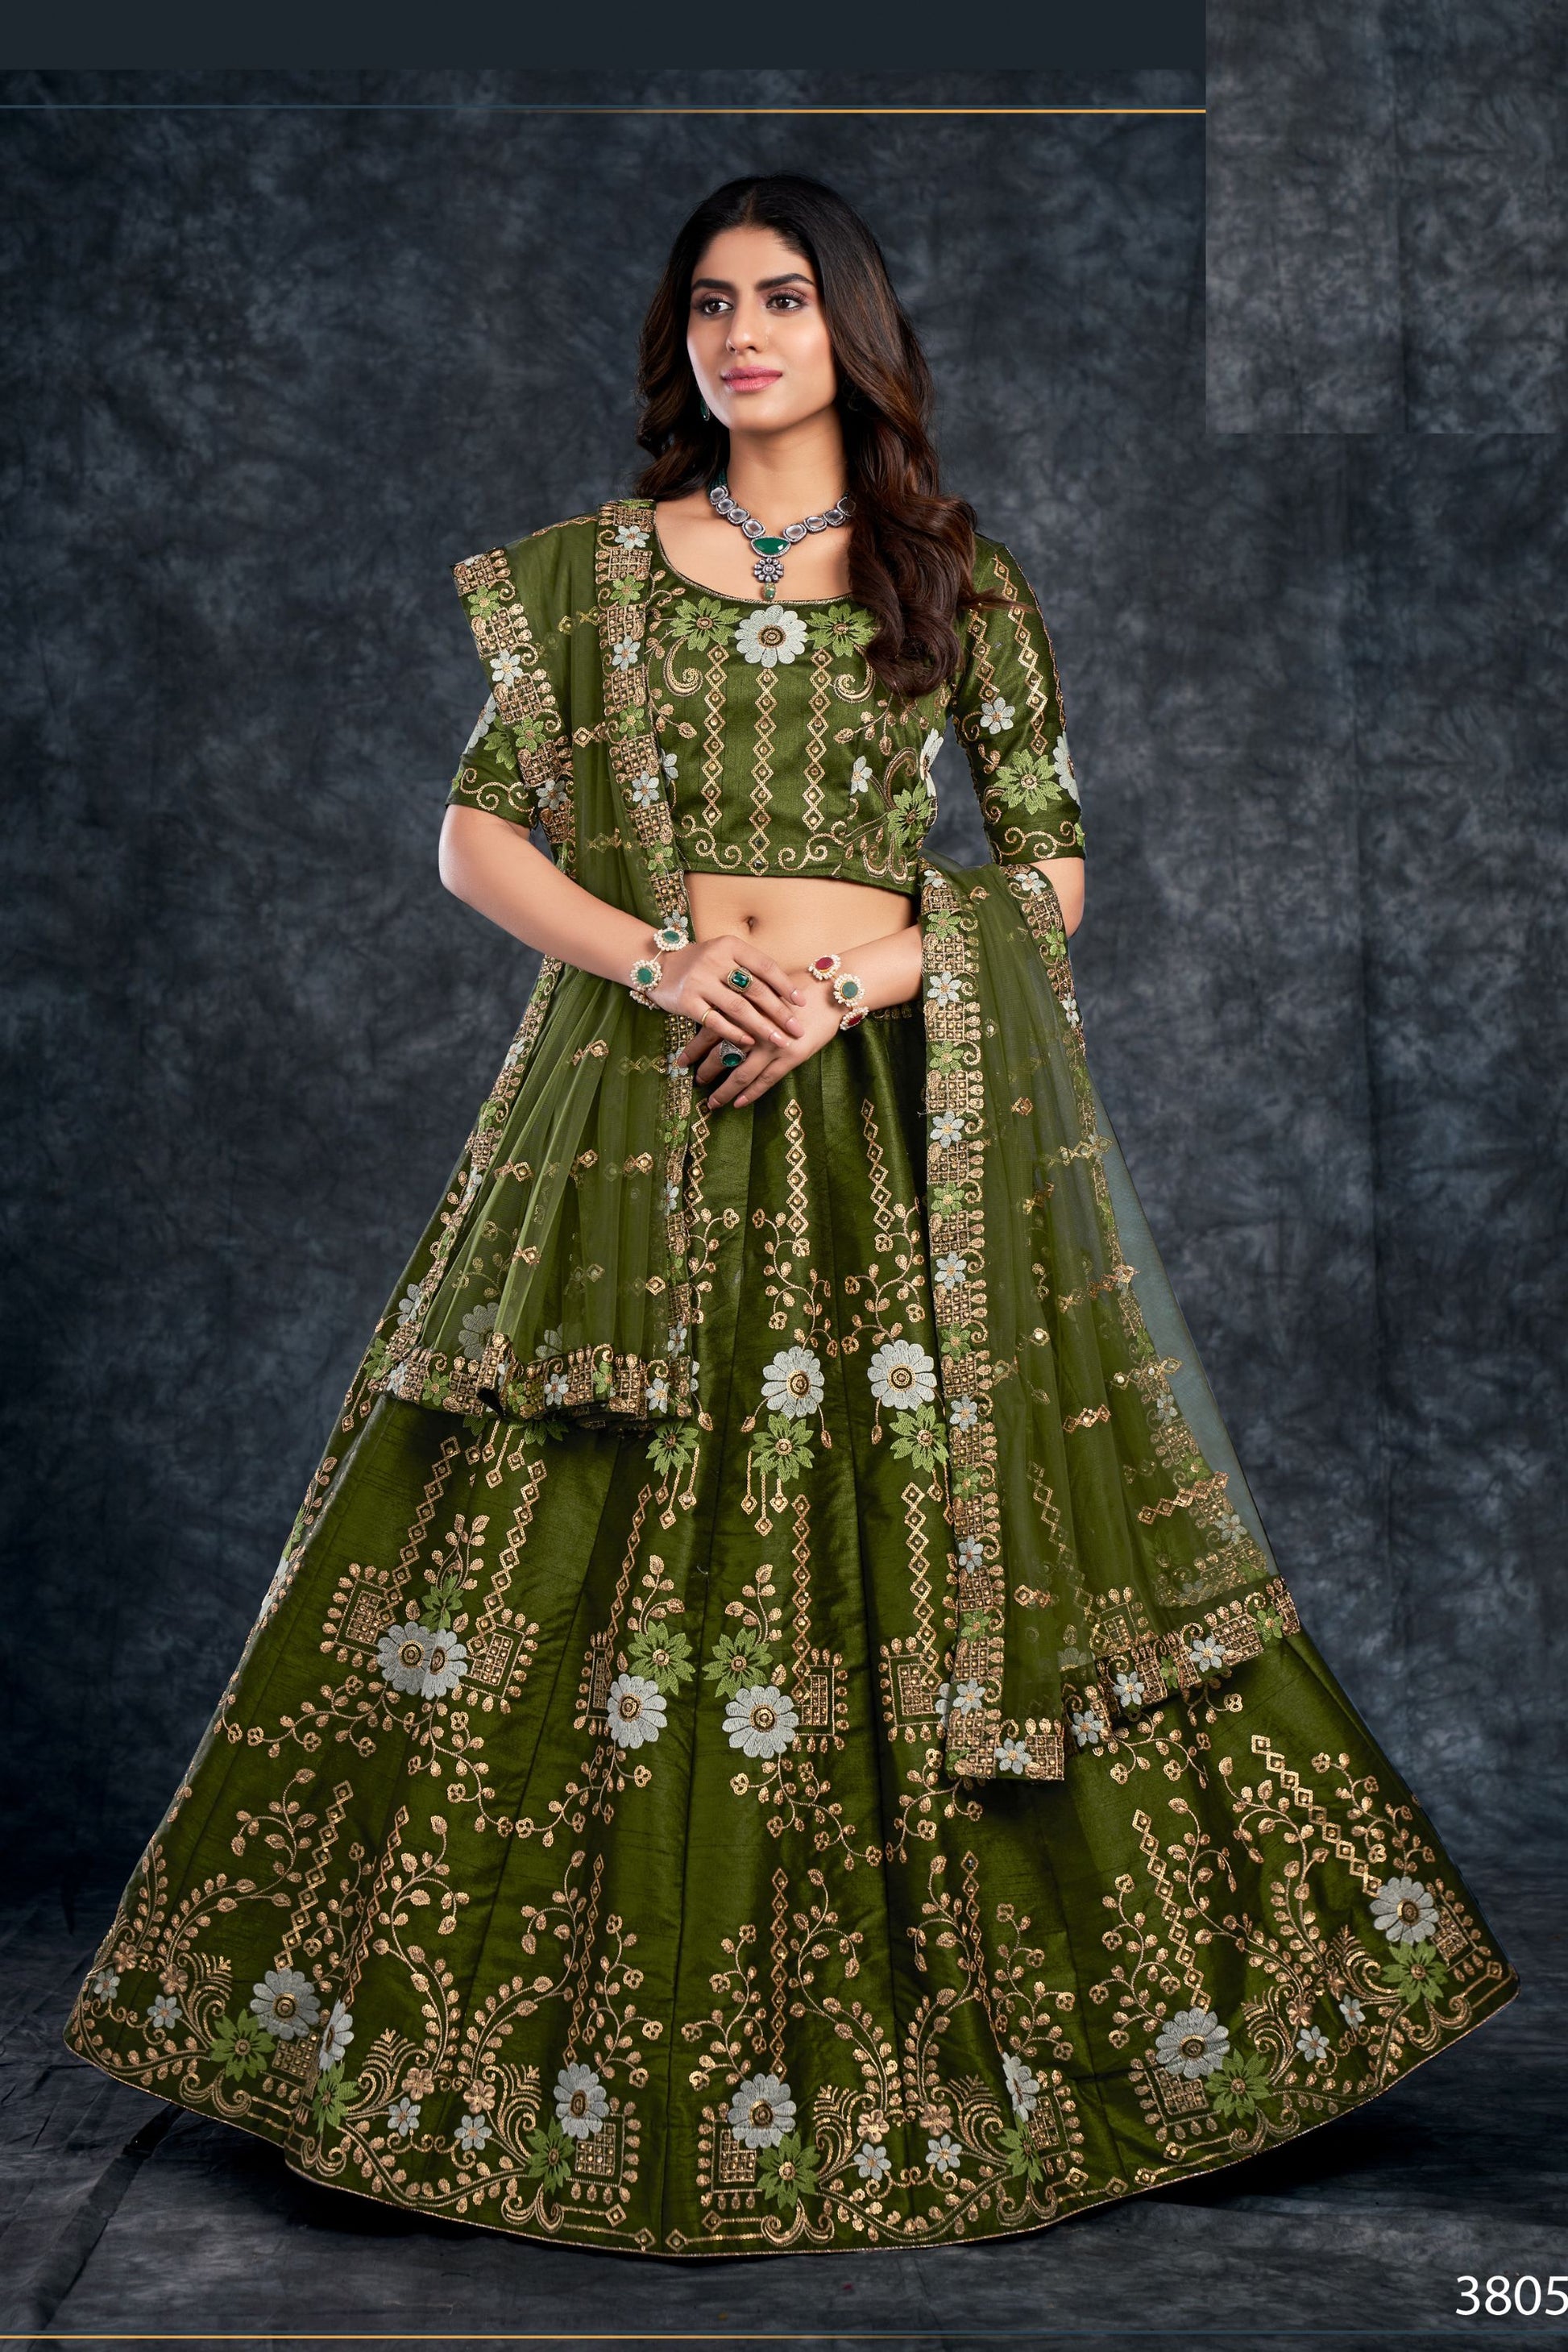 Dark Green Indian Silk Floral Lehenga Choli For Indian Festivals & Weddings - Sequence Embroidery Work, Thread Embroidery Work, Stone Work, Zari Work